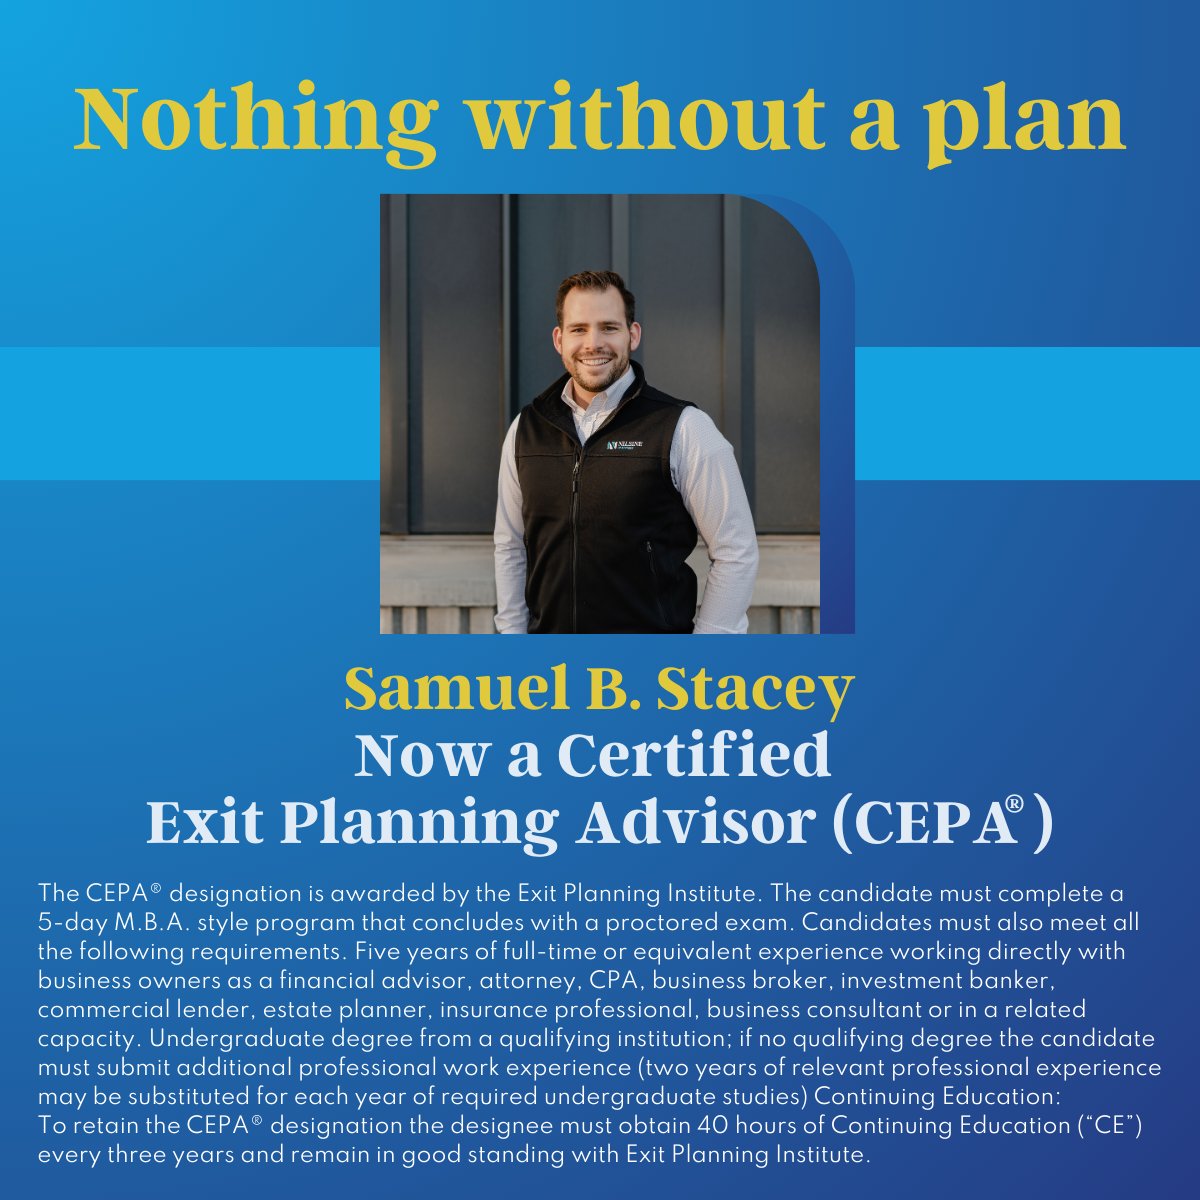 We are excited to announce that Samuel Stacey has earned the Certified Exit Planning Advisor (CEPA®) designation. Sam obtaining the #CEPA® delivers on our promise to continually grow ourselves here at Nilsine Partners. Congratulations Sam! 
#exitplanning